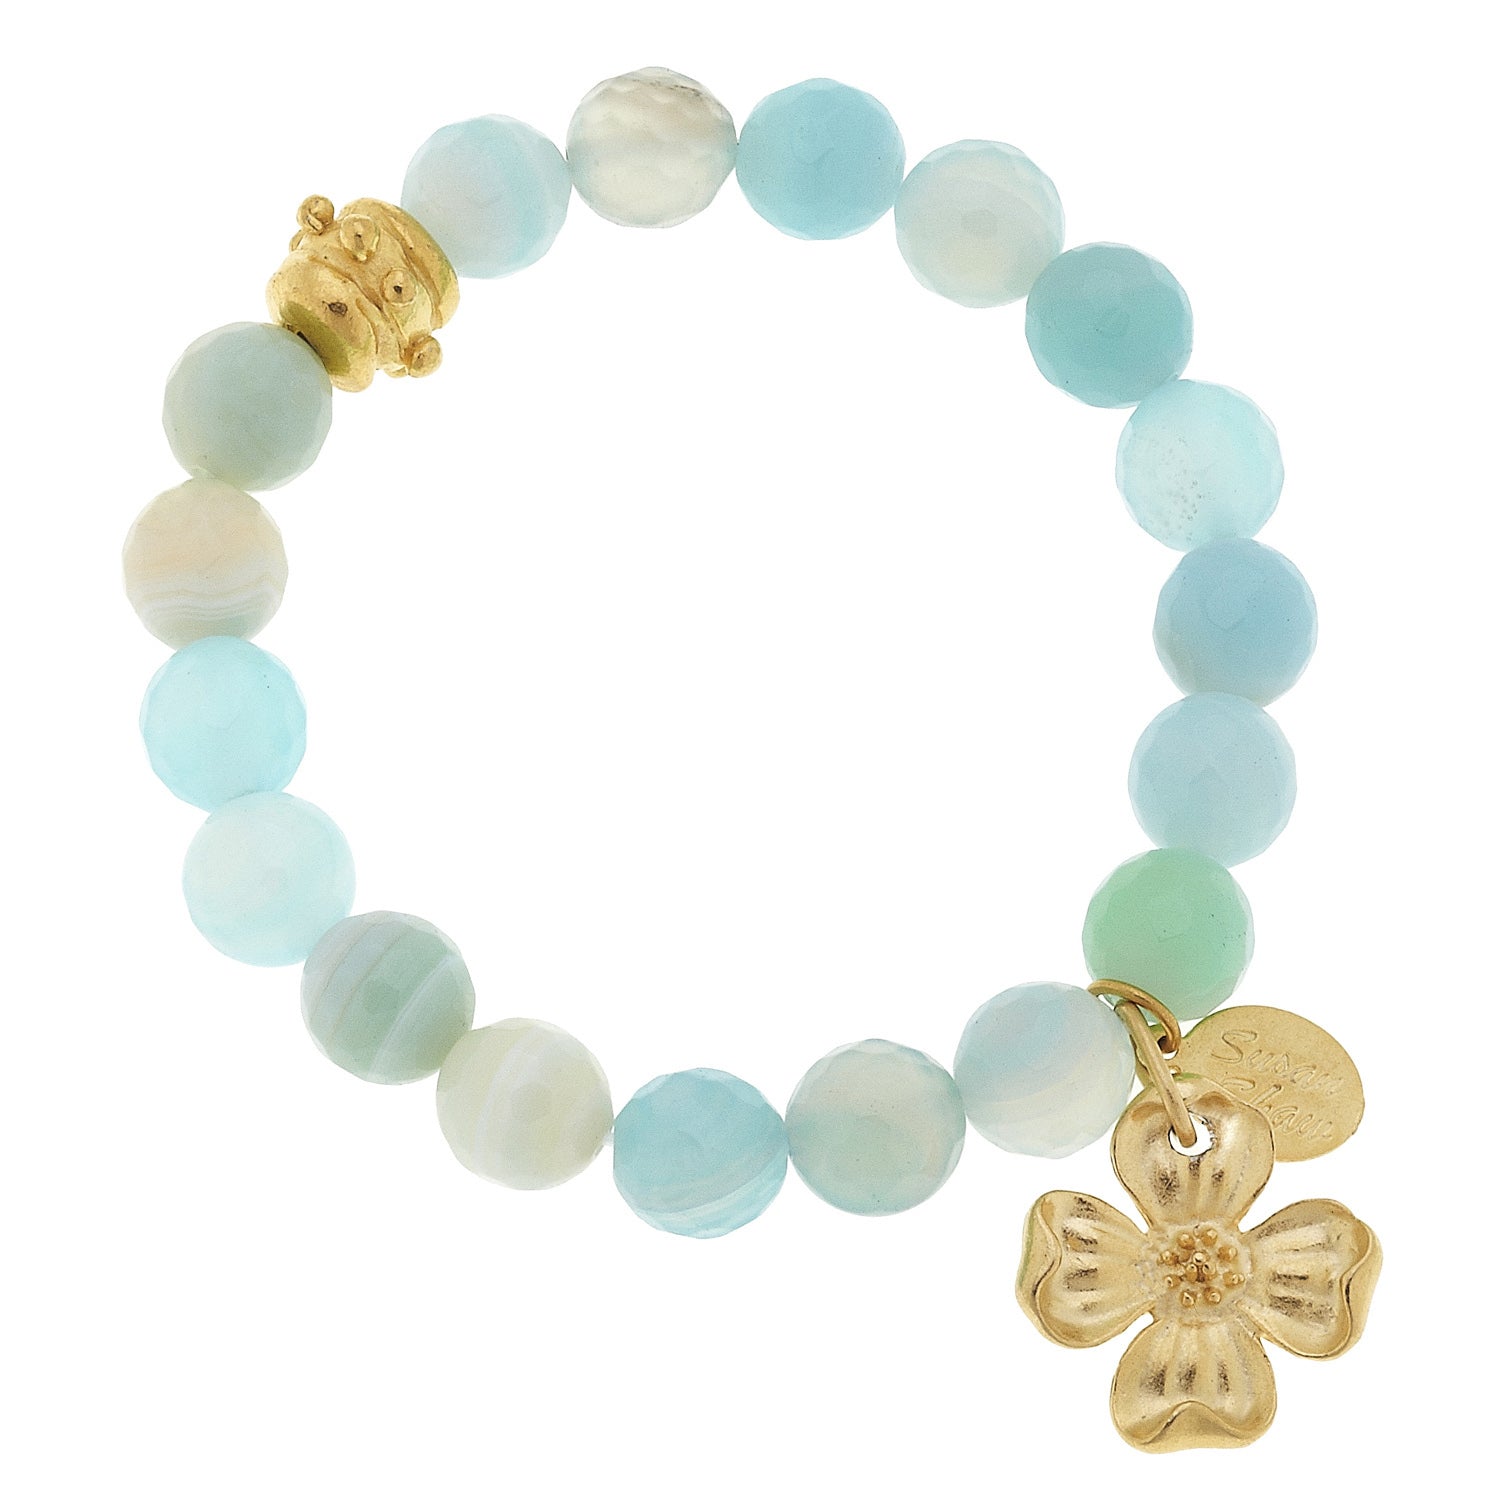 Susan Shaw Clover Seafoam Agate Tennis Bracelet with Toggle Clasp, Gold Plated 8"